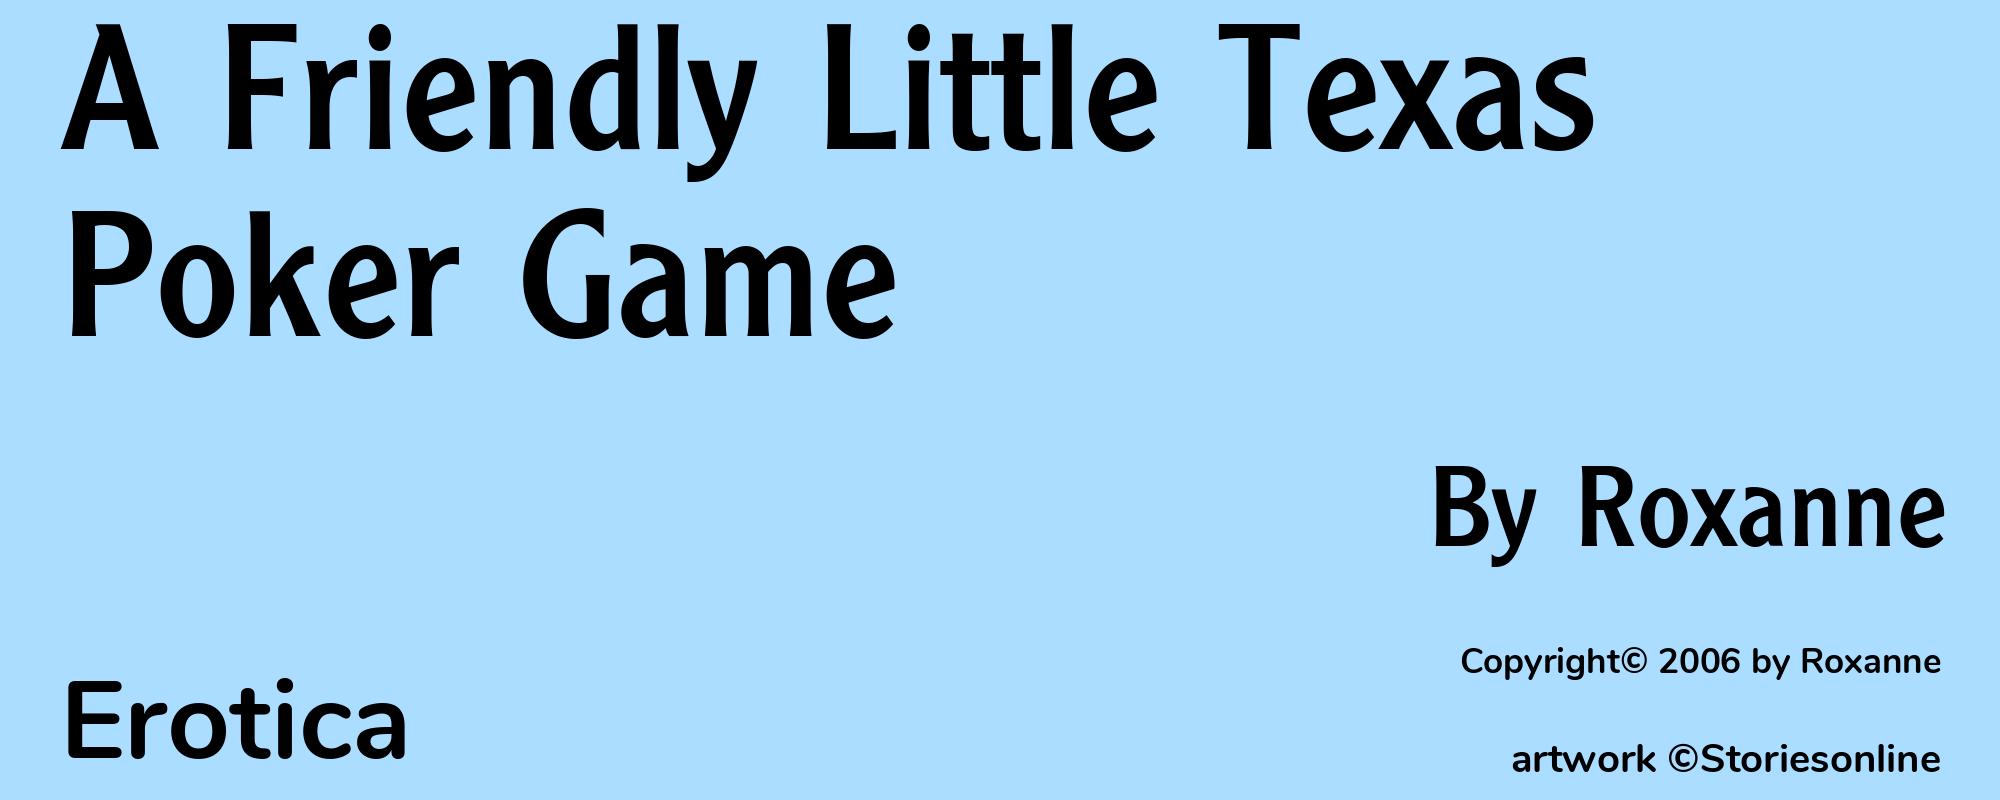 A Friendly Little Texas Poker Game - Cover